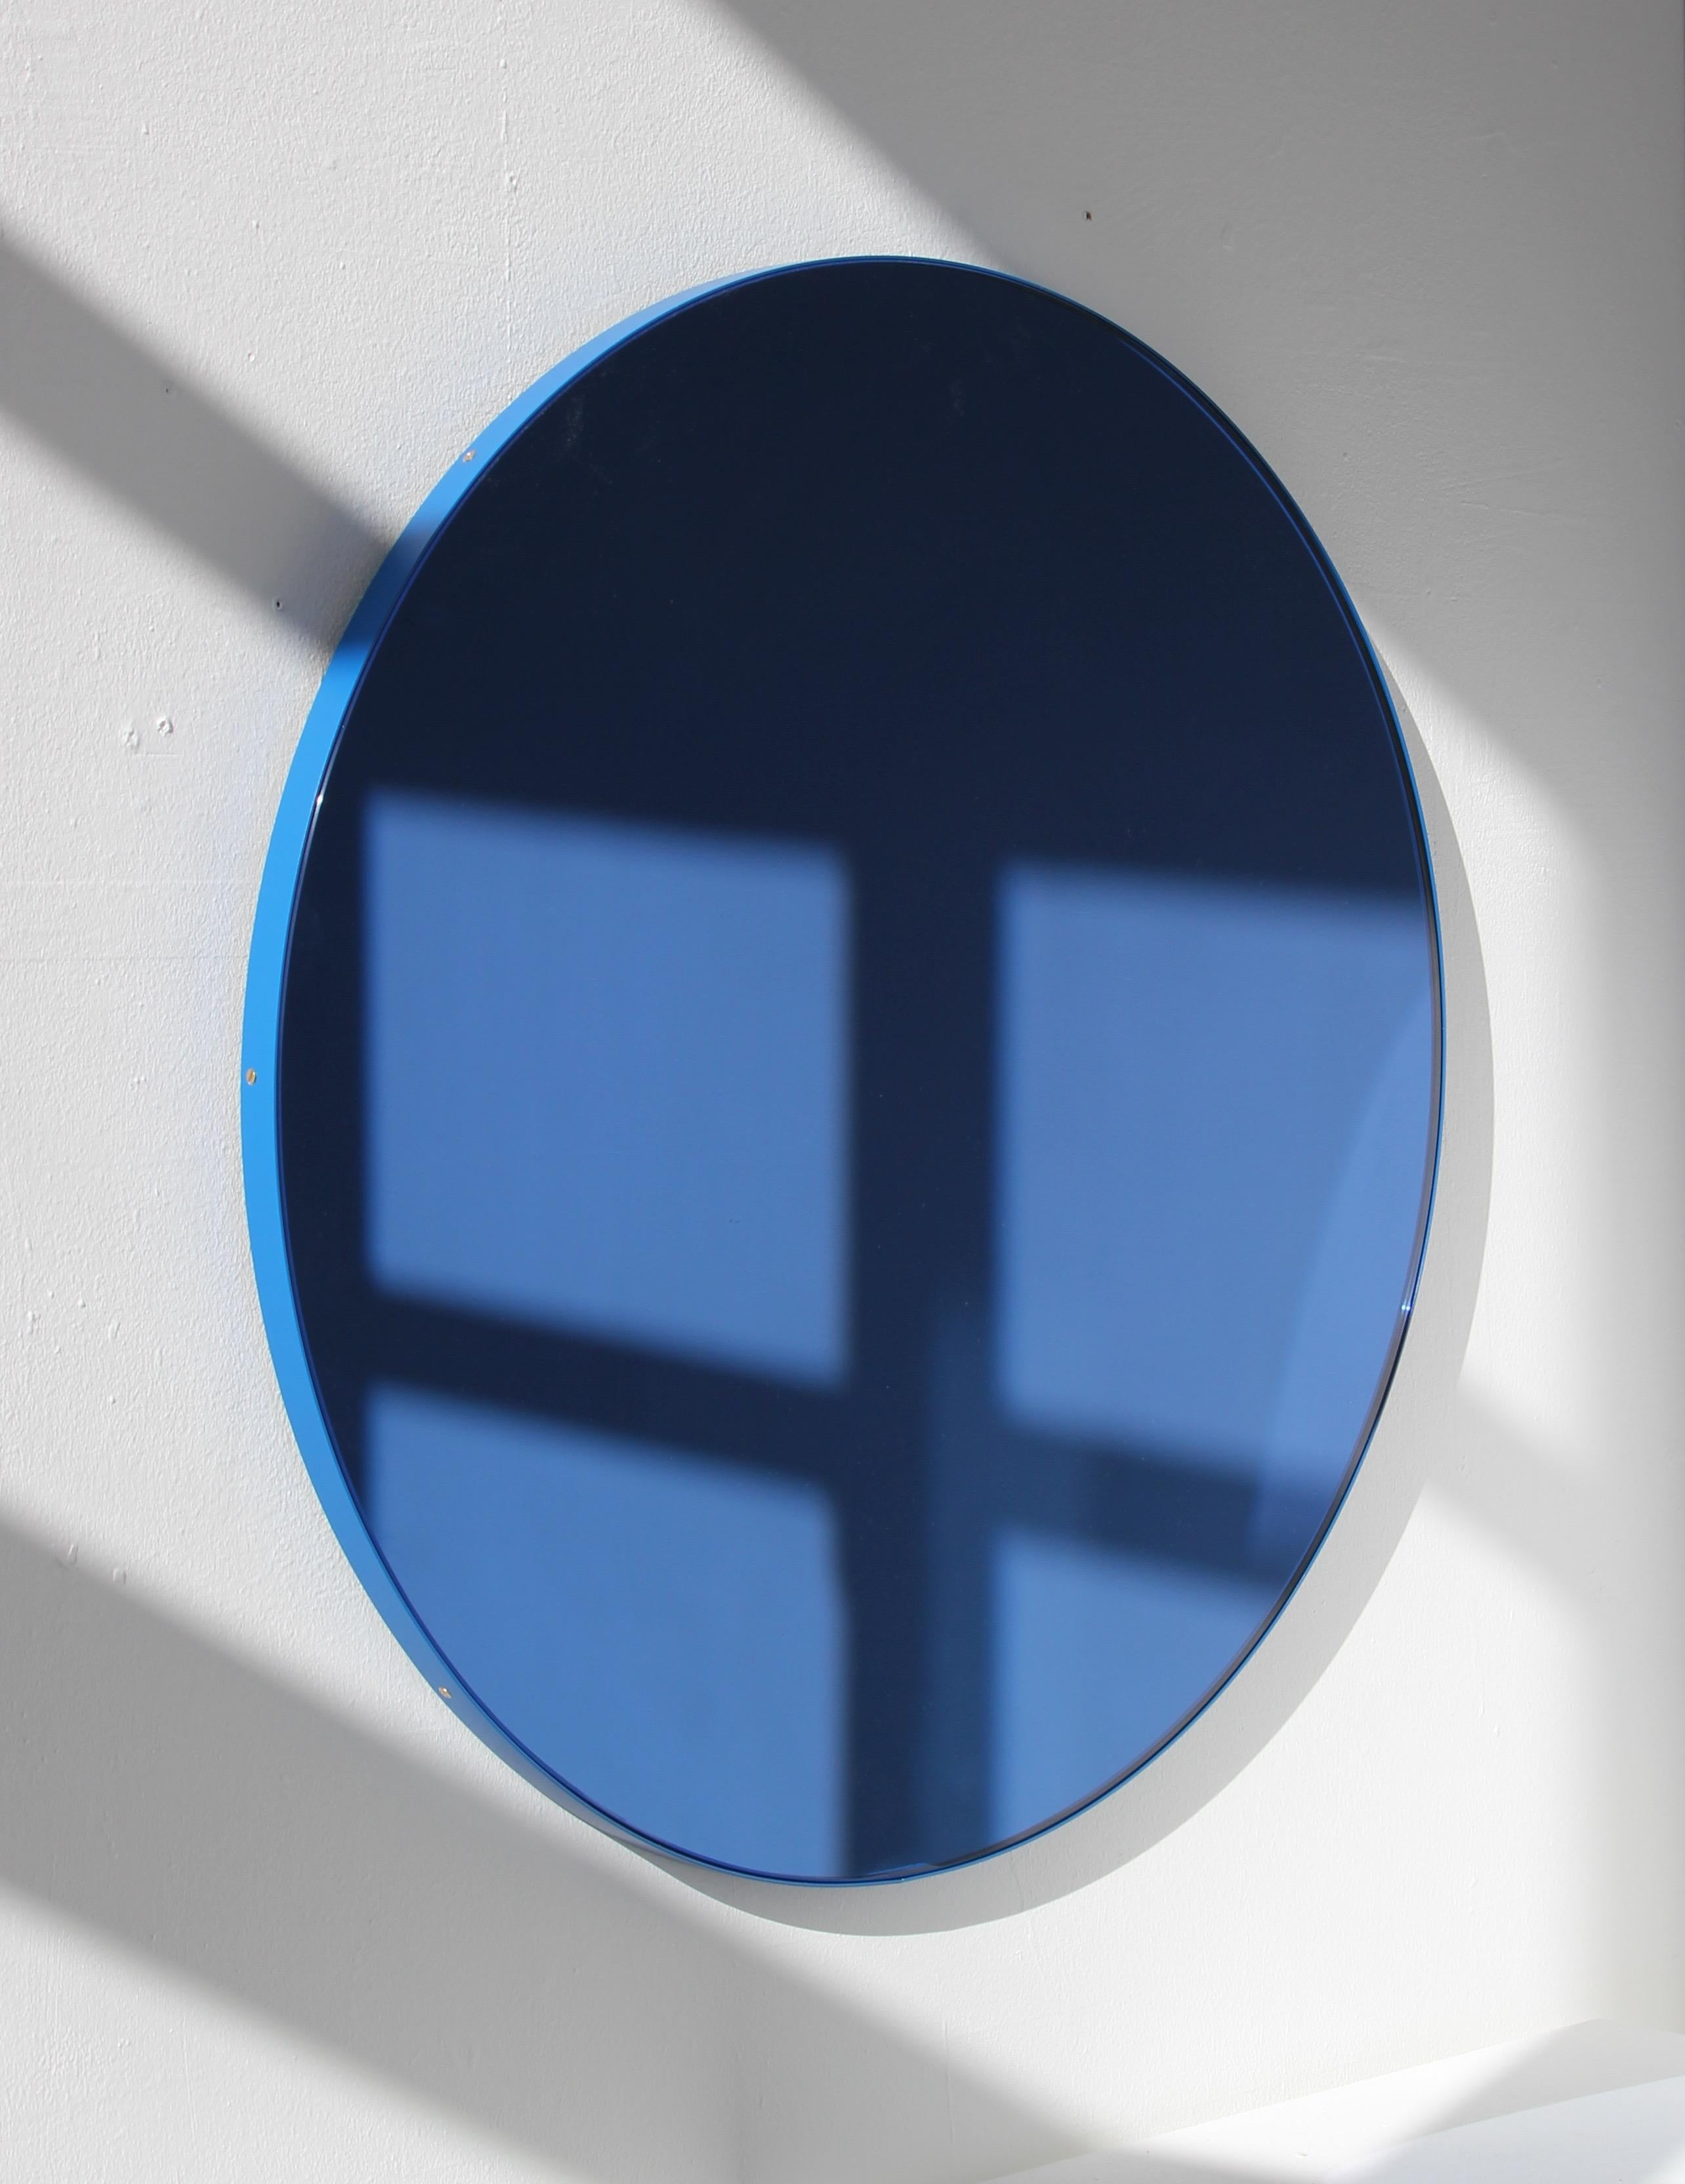 Contemporary blue tinted round mirror with an aluminium powder coated blue frame. Designed and hand-crafted in London, UK.

Our mirrors are designed with an integrated French cleat (split batten) system that ensures the mirror is securely mounted